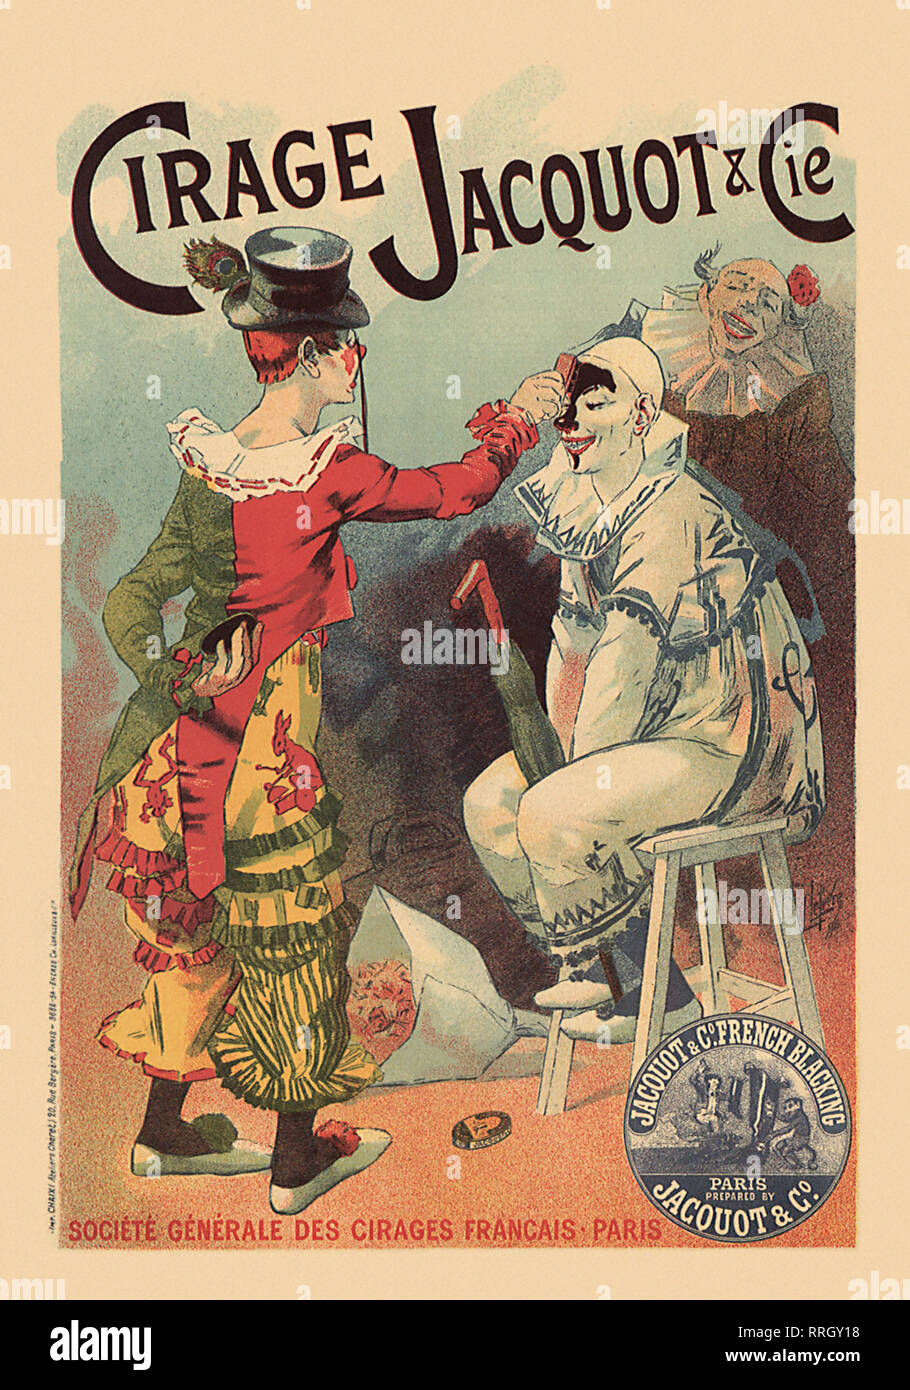 A Clown Putting Shoe Polish on Another Clown Poster. Stock Photo